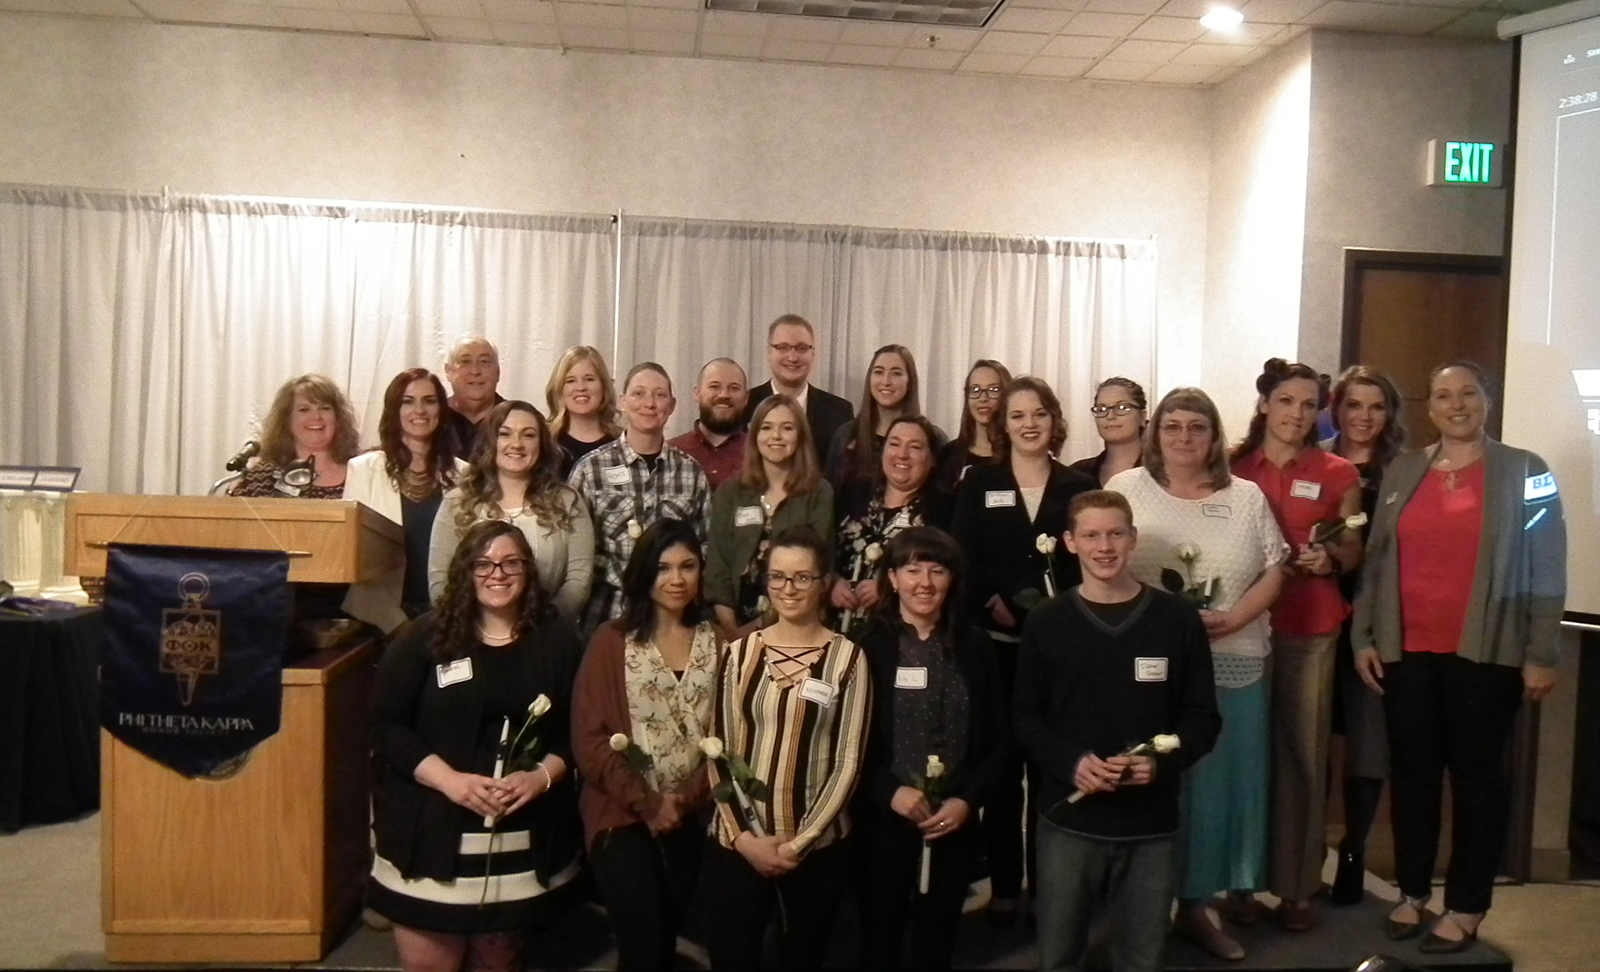 PTK Honor Society welcomes new members during spring induction ceremony.